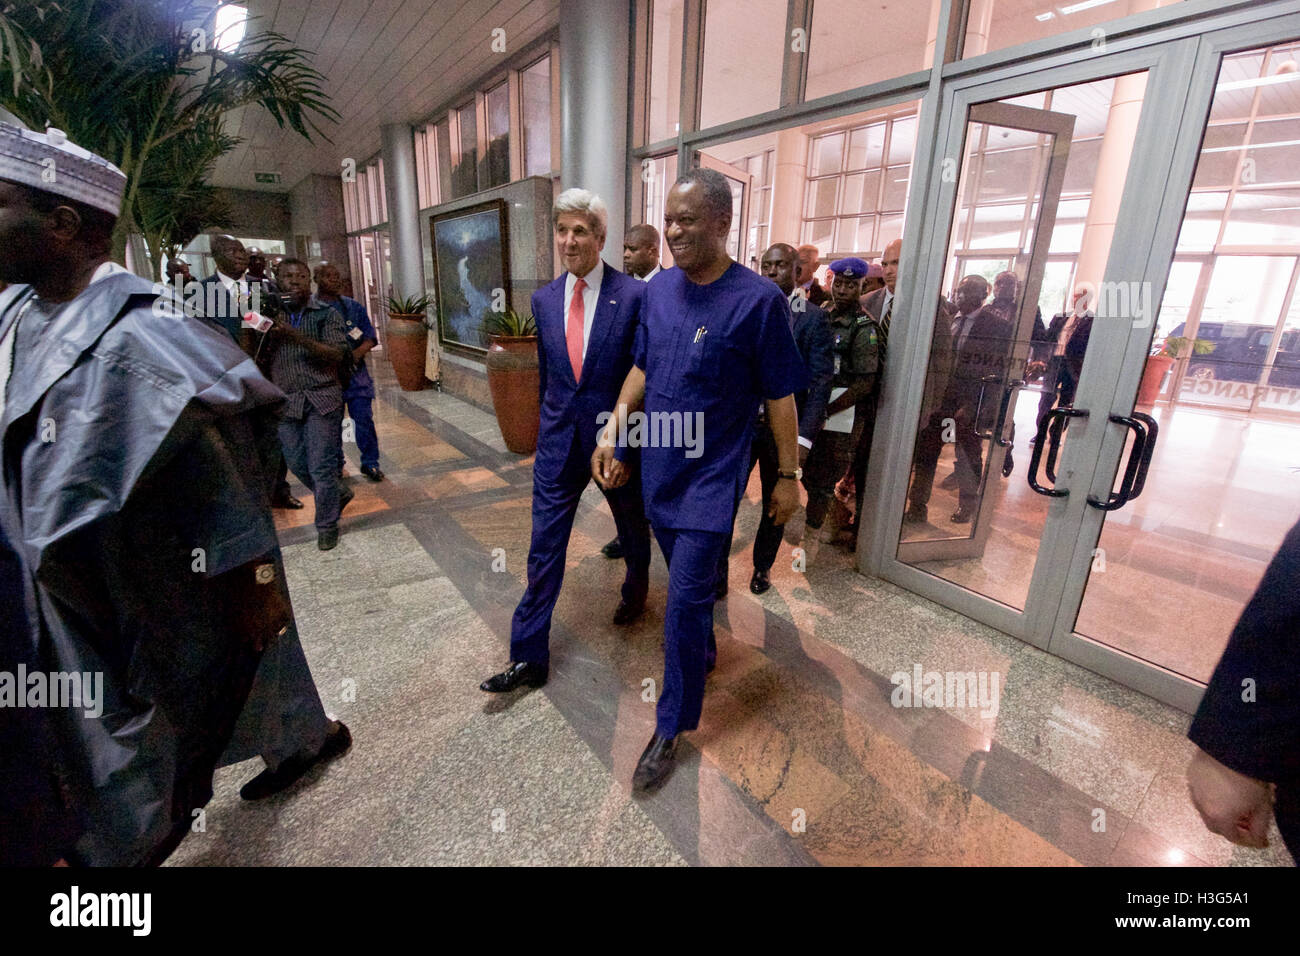 U.S. Secretary of State John Kerry walks with Nigerian Foreign Minister Geoffrey Onyeama on August 23, 2016, after arriving at Ministry of Foreign Affairs in Abuja, Nigeria, following meetings with Nigerian President Muhummadu Buhari and Governor’ of the country’s Northern region. Stock Photo